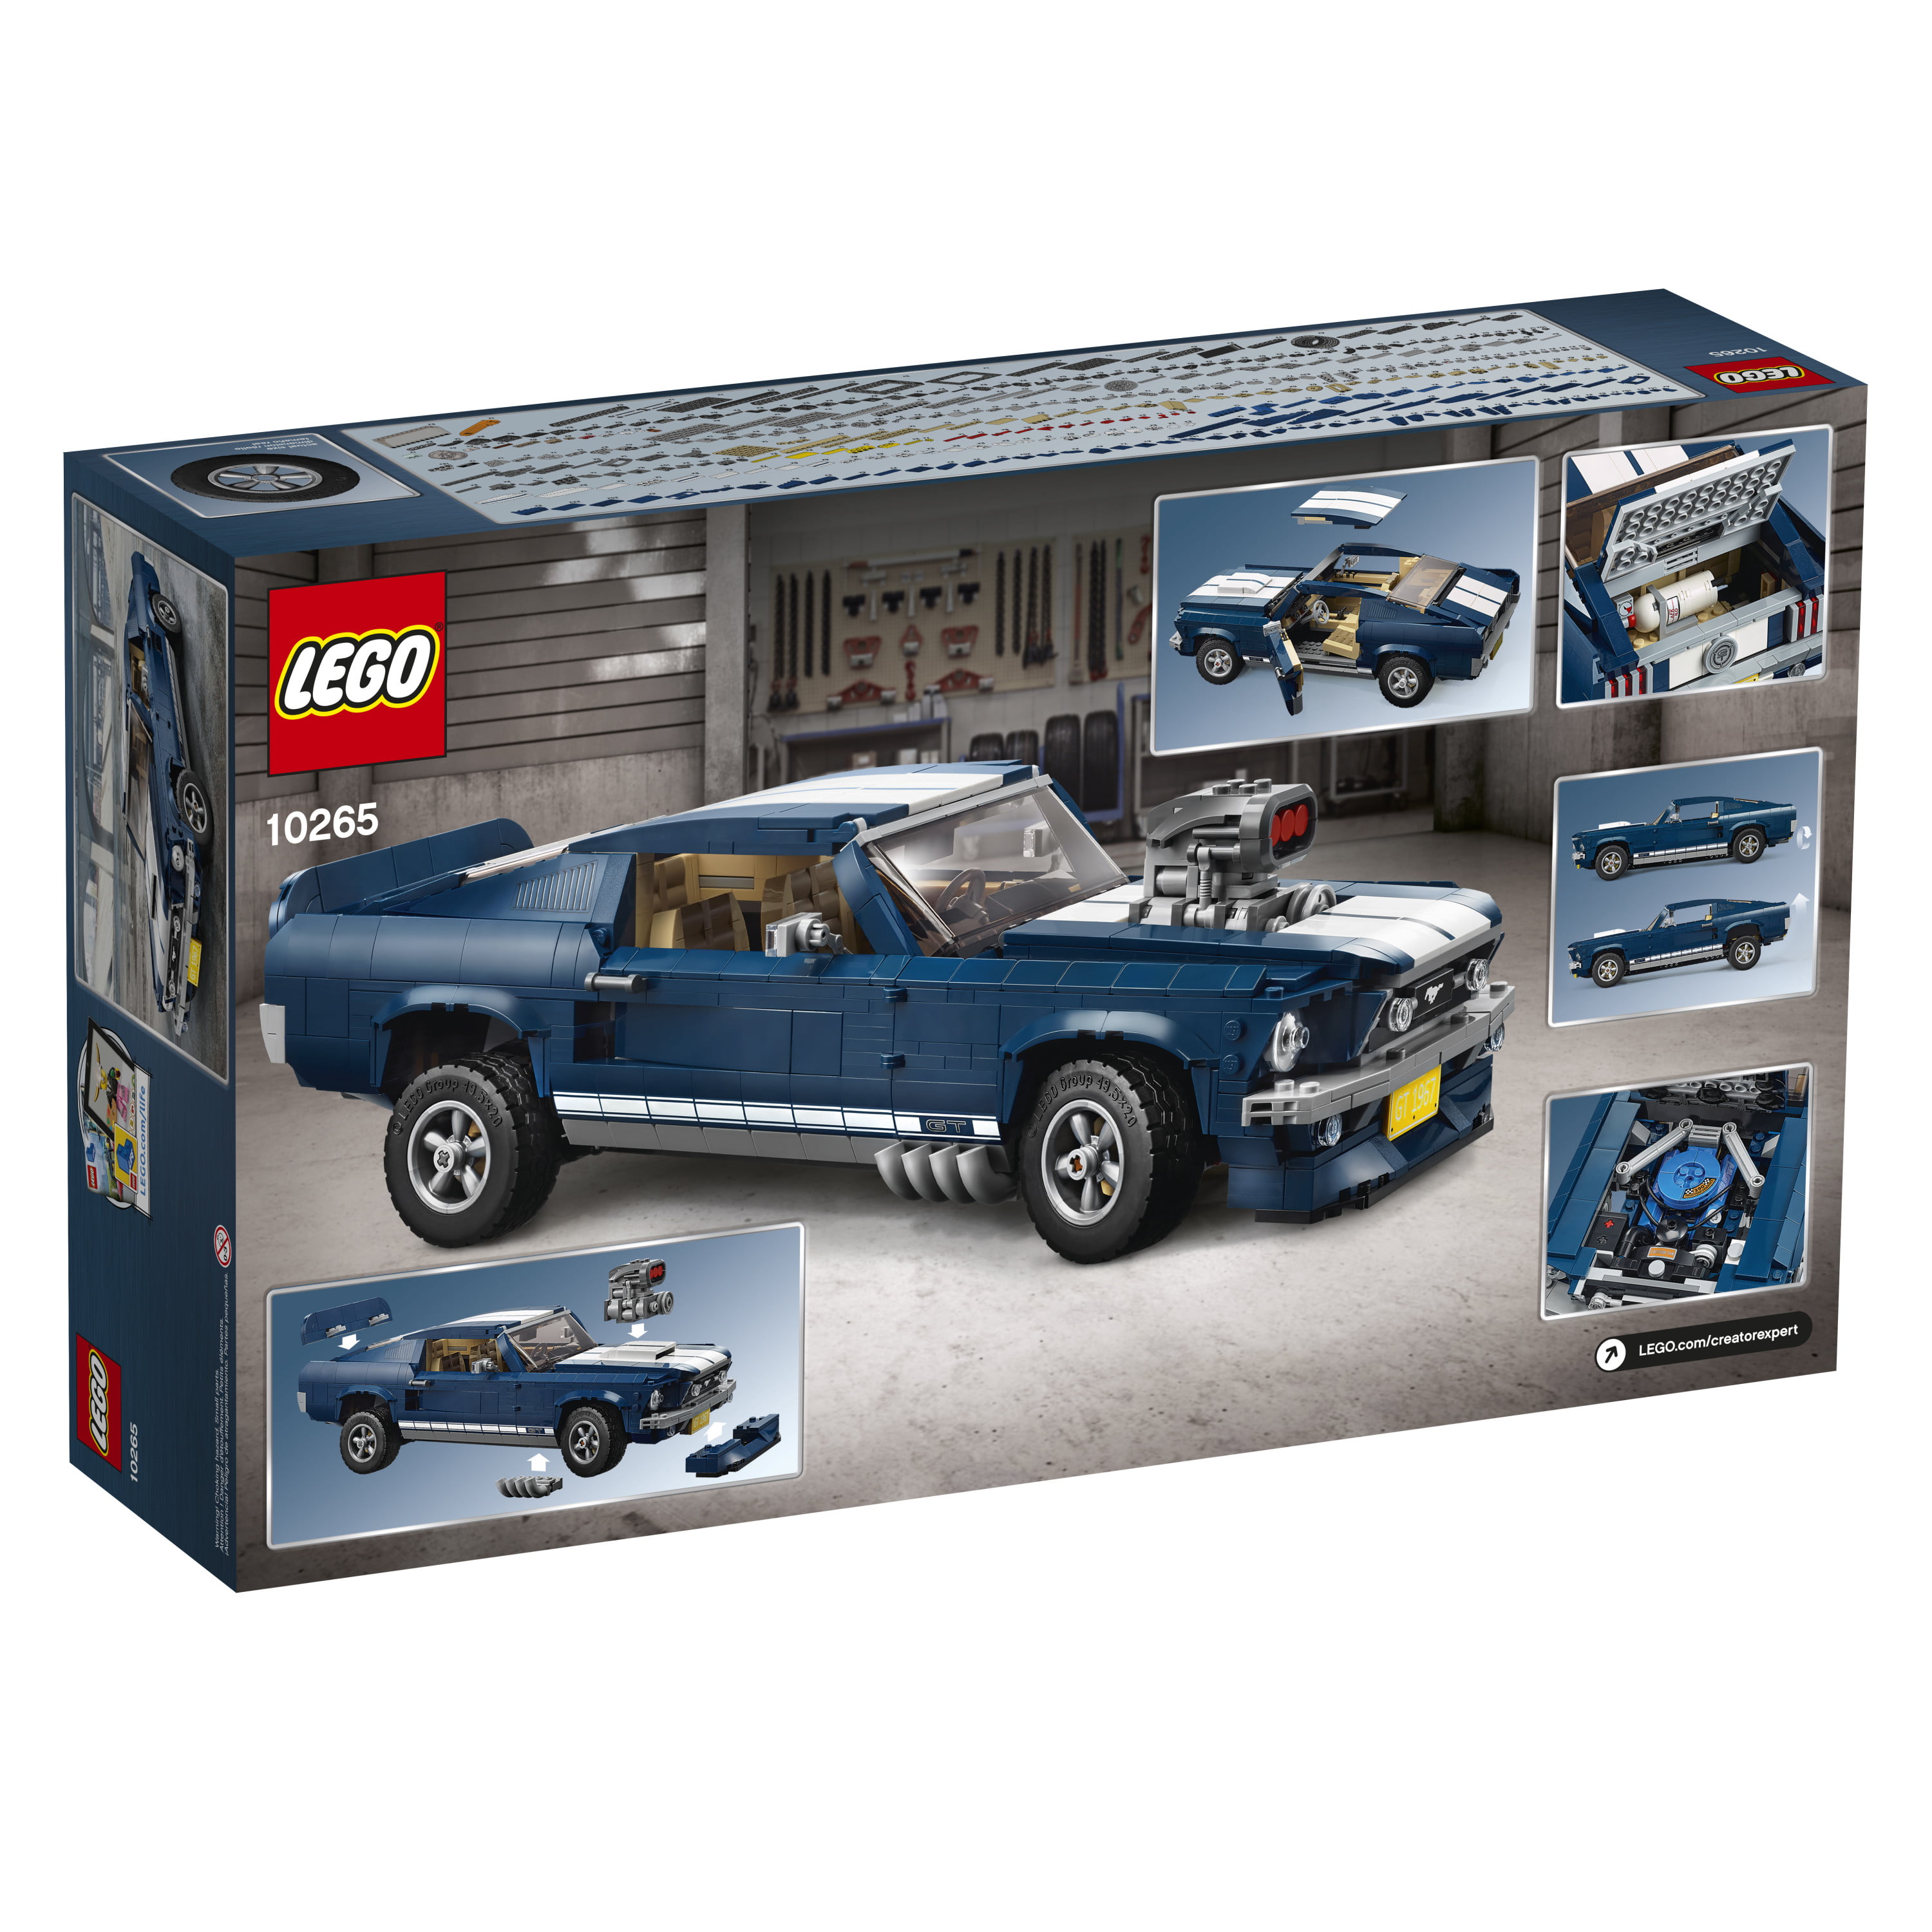 LEGO Creator Expert Ford Mustang 10265 Building Set - Exclusive Advanced Collector's Car Model, Featuring Detailed Interior, V8 Engine, Home and Office Display, Collectible Adults and Teens - Walmart.com